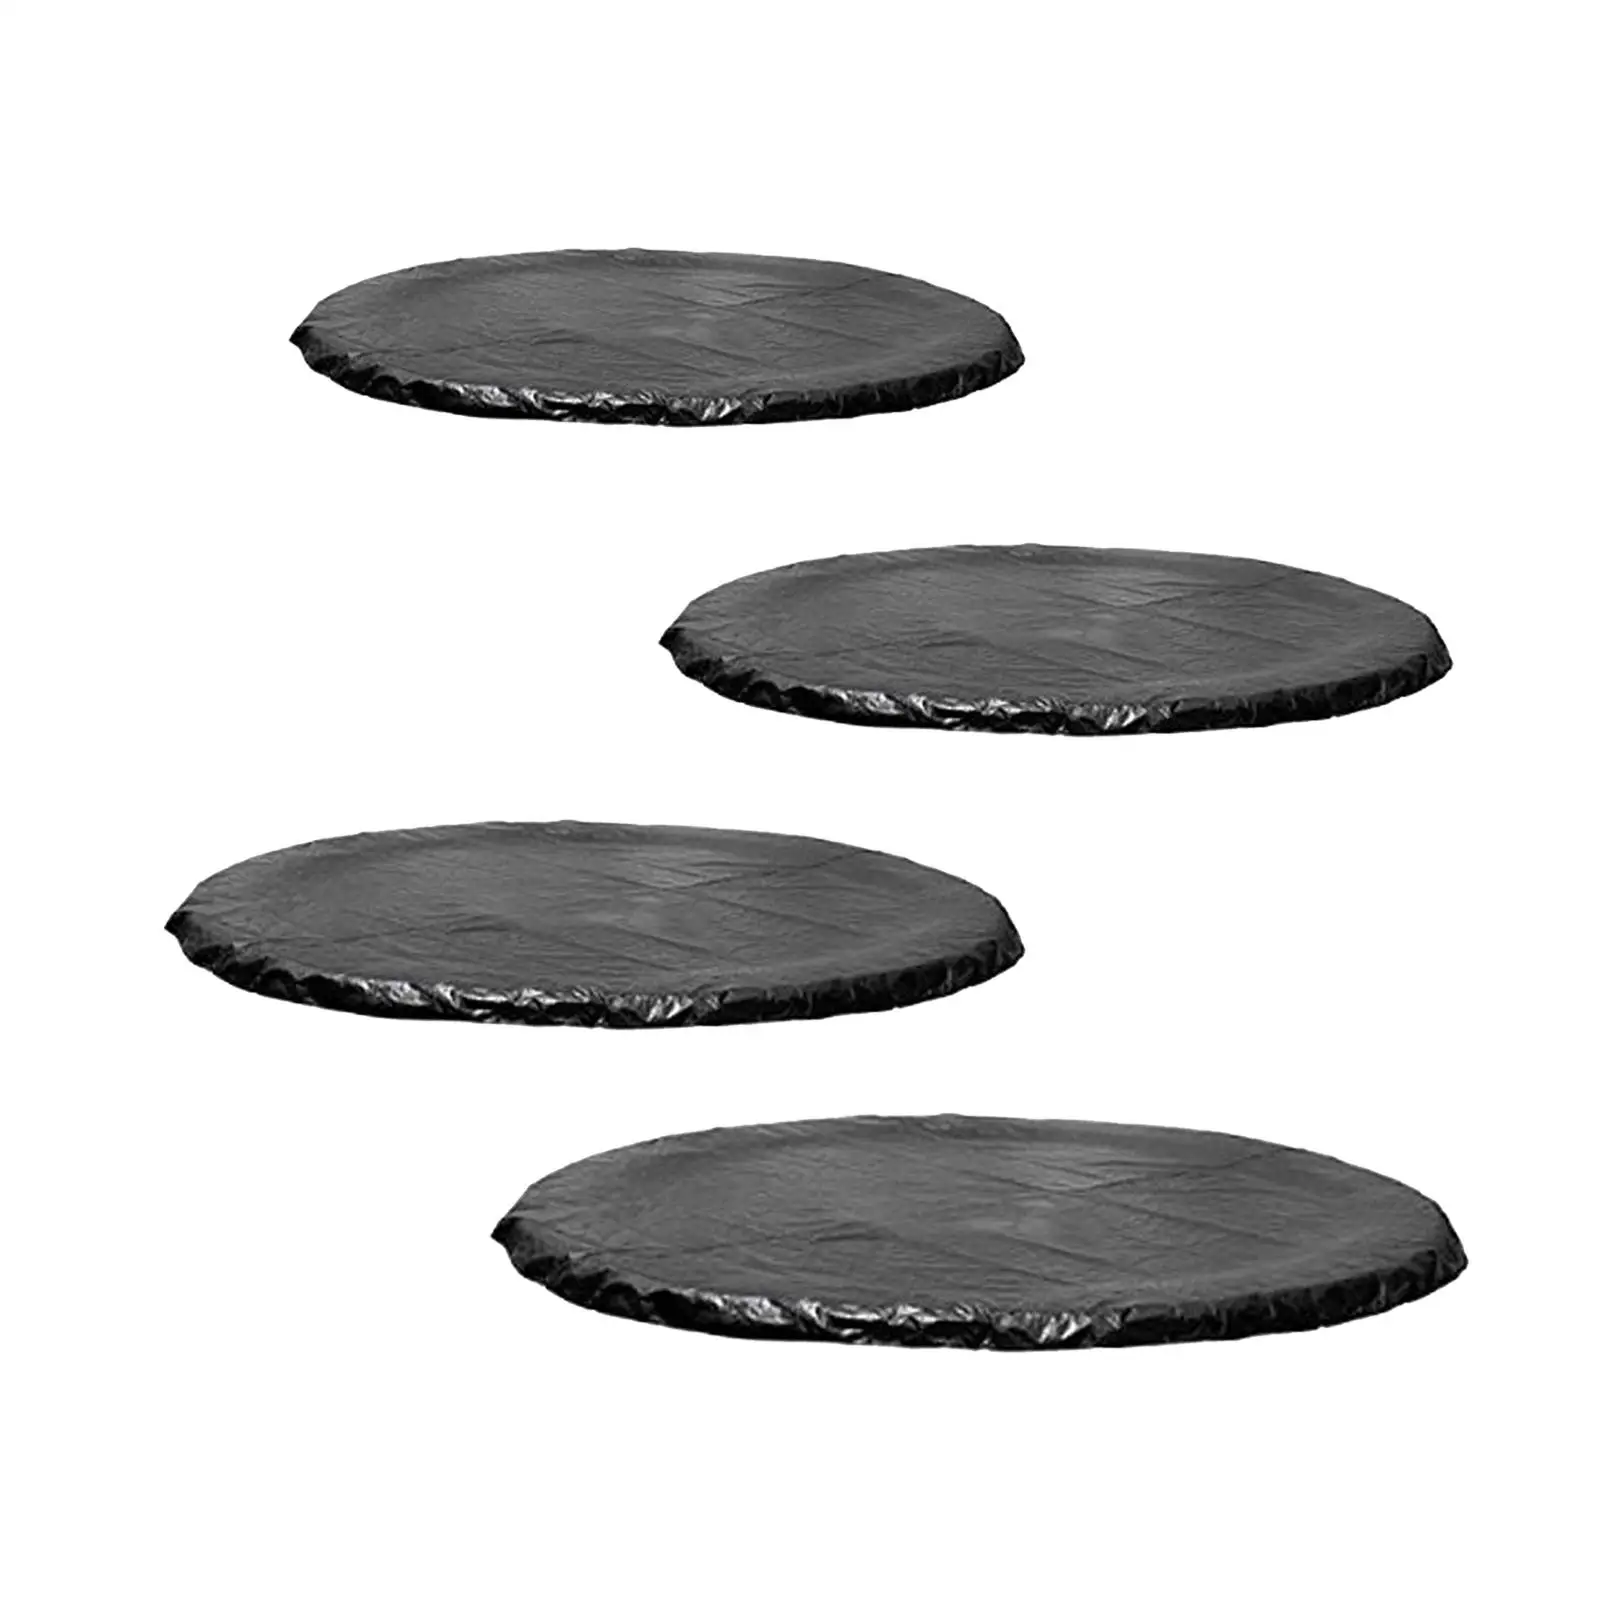 Black Trampoline Cover Weather and Rain Cover Durable Elastic Ropes Fixed Wear Resistant All Season Use Accessories Round